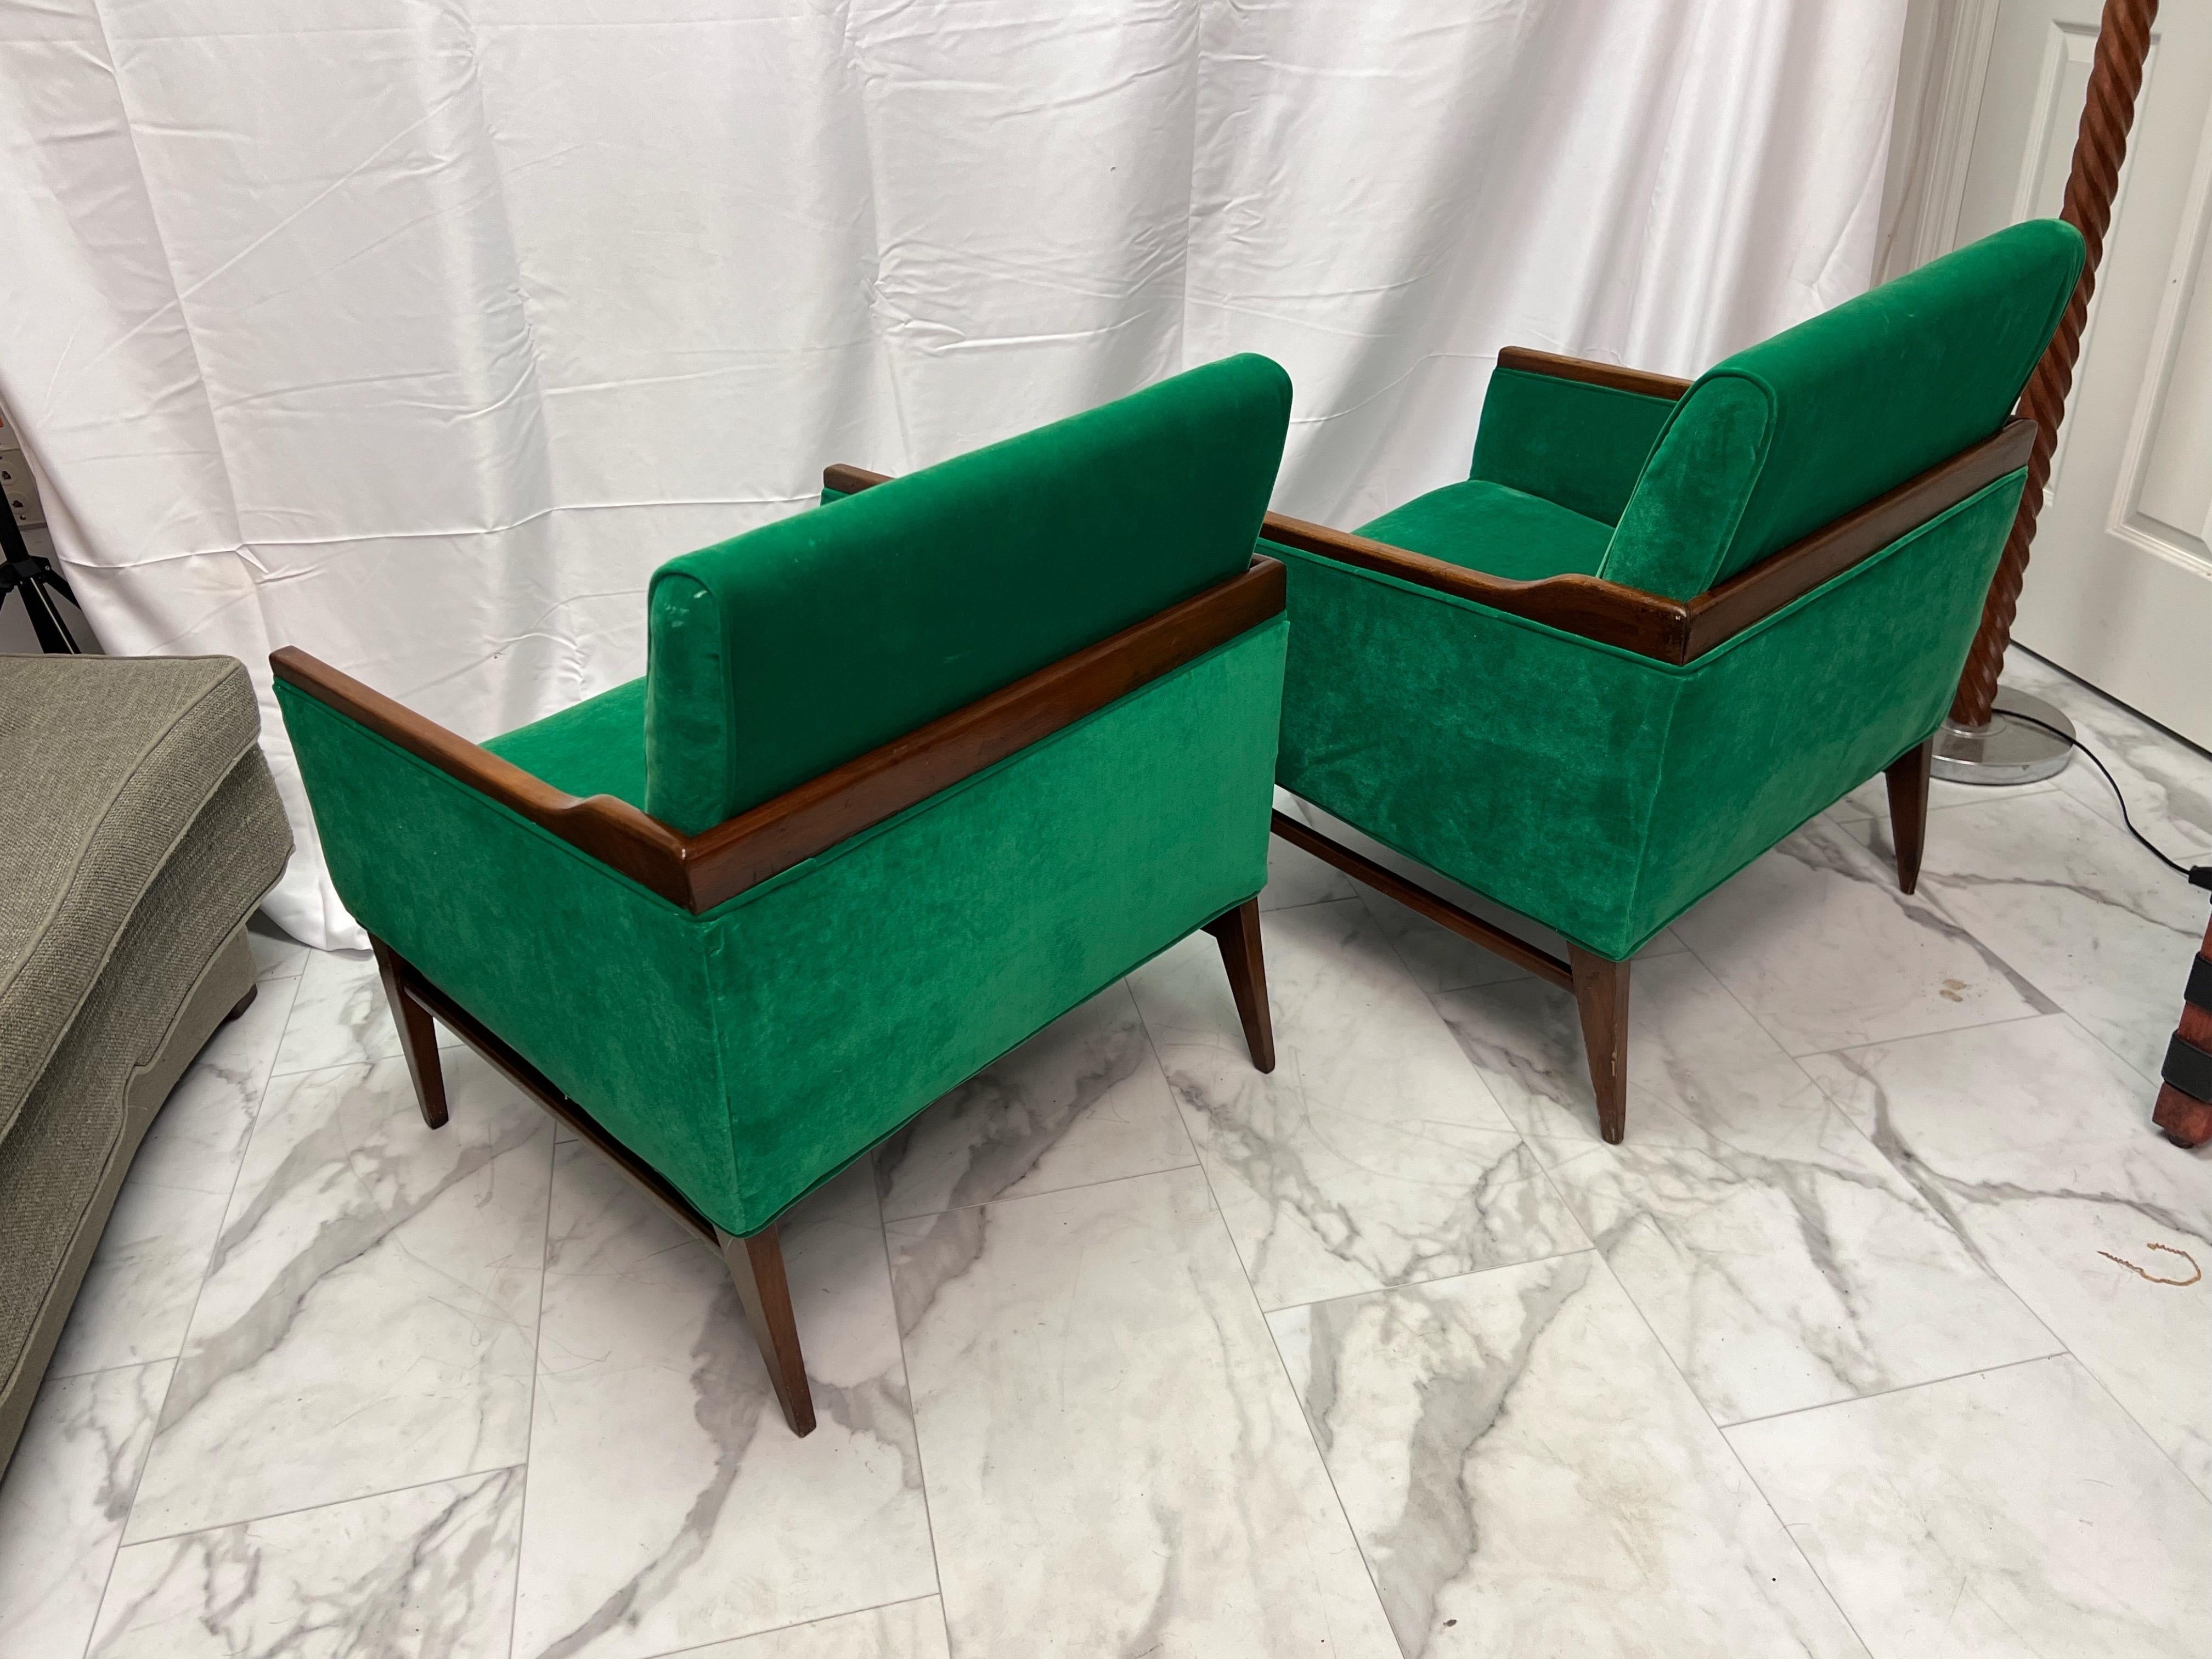 1950’s Walnut and Green Velvet Low Profile Chairs - a Pair For Sale 5